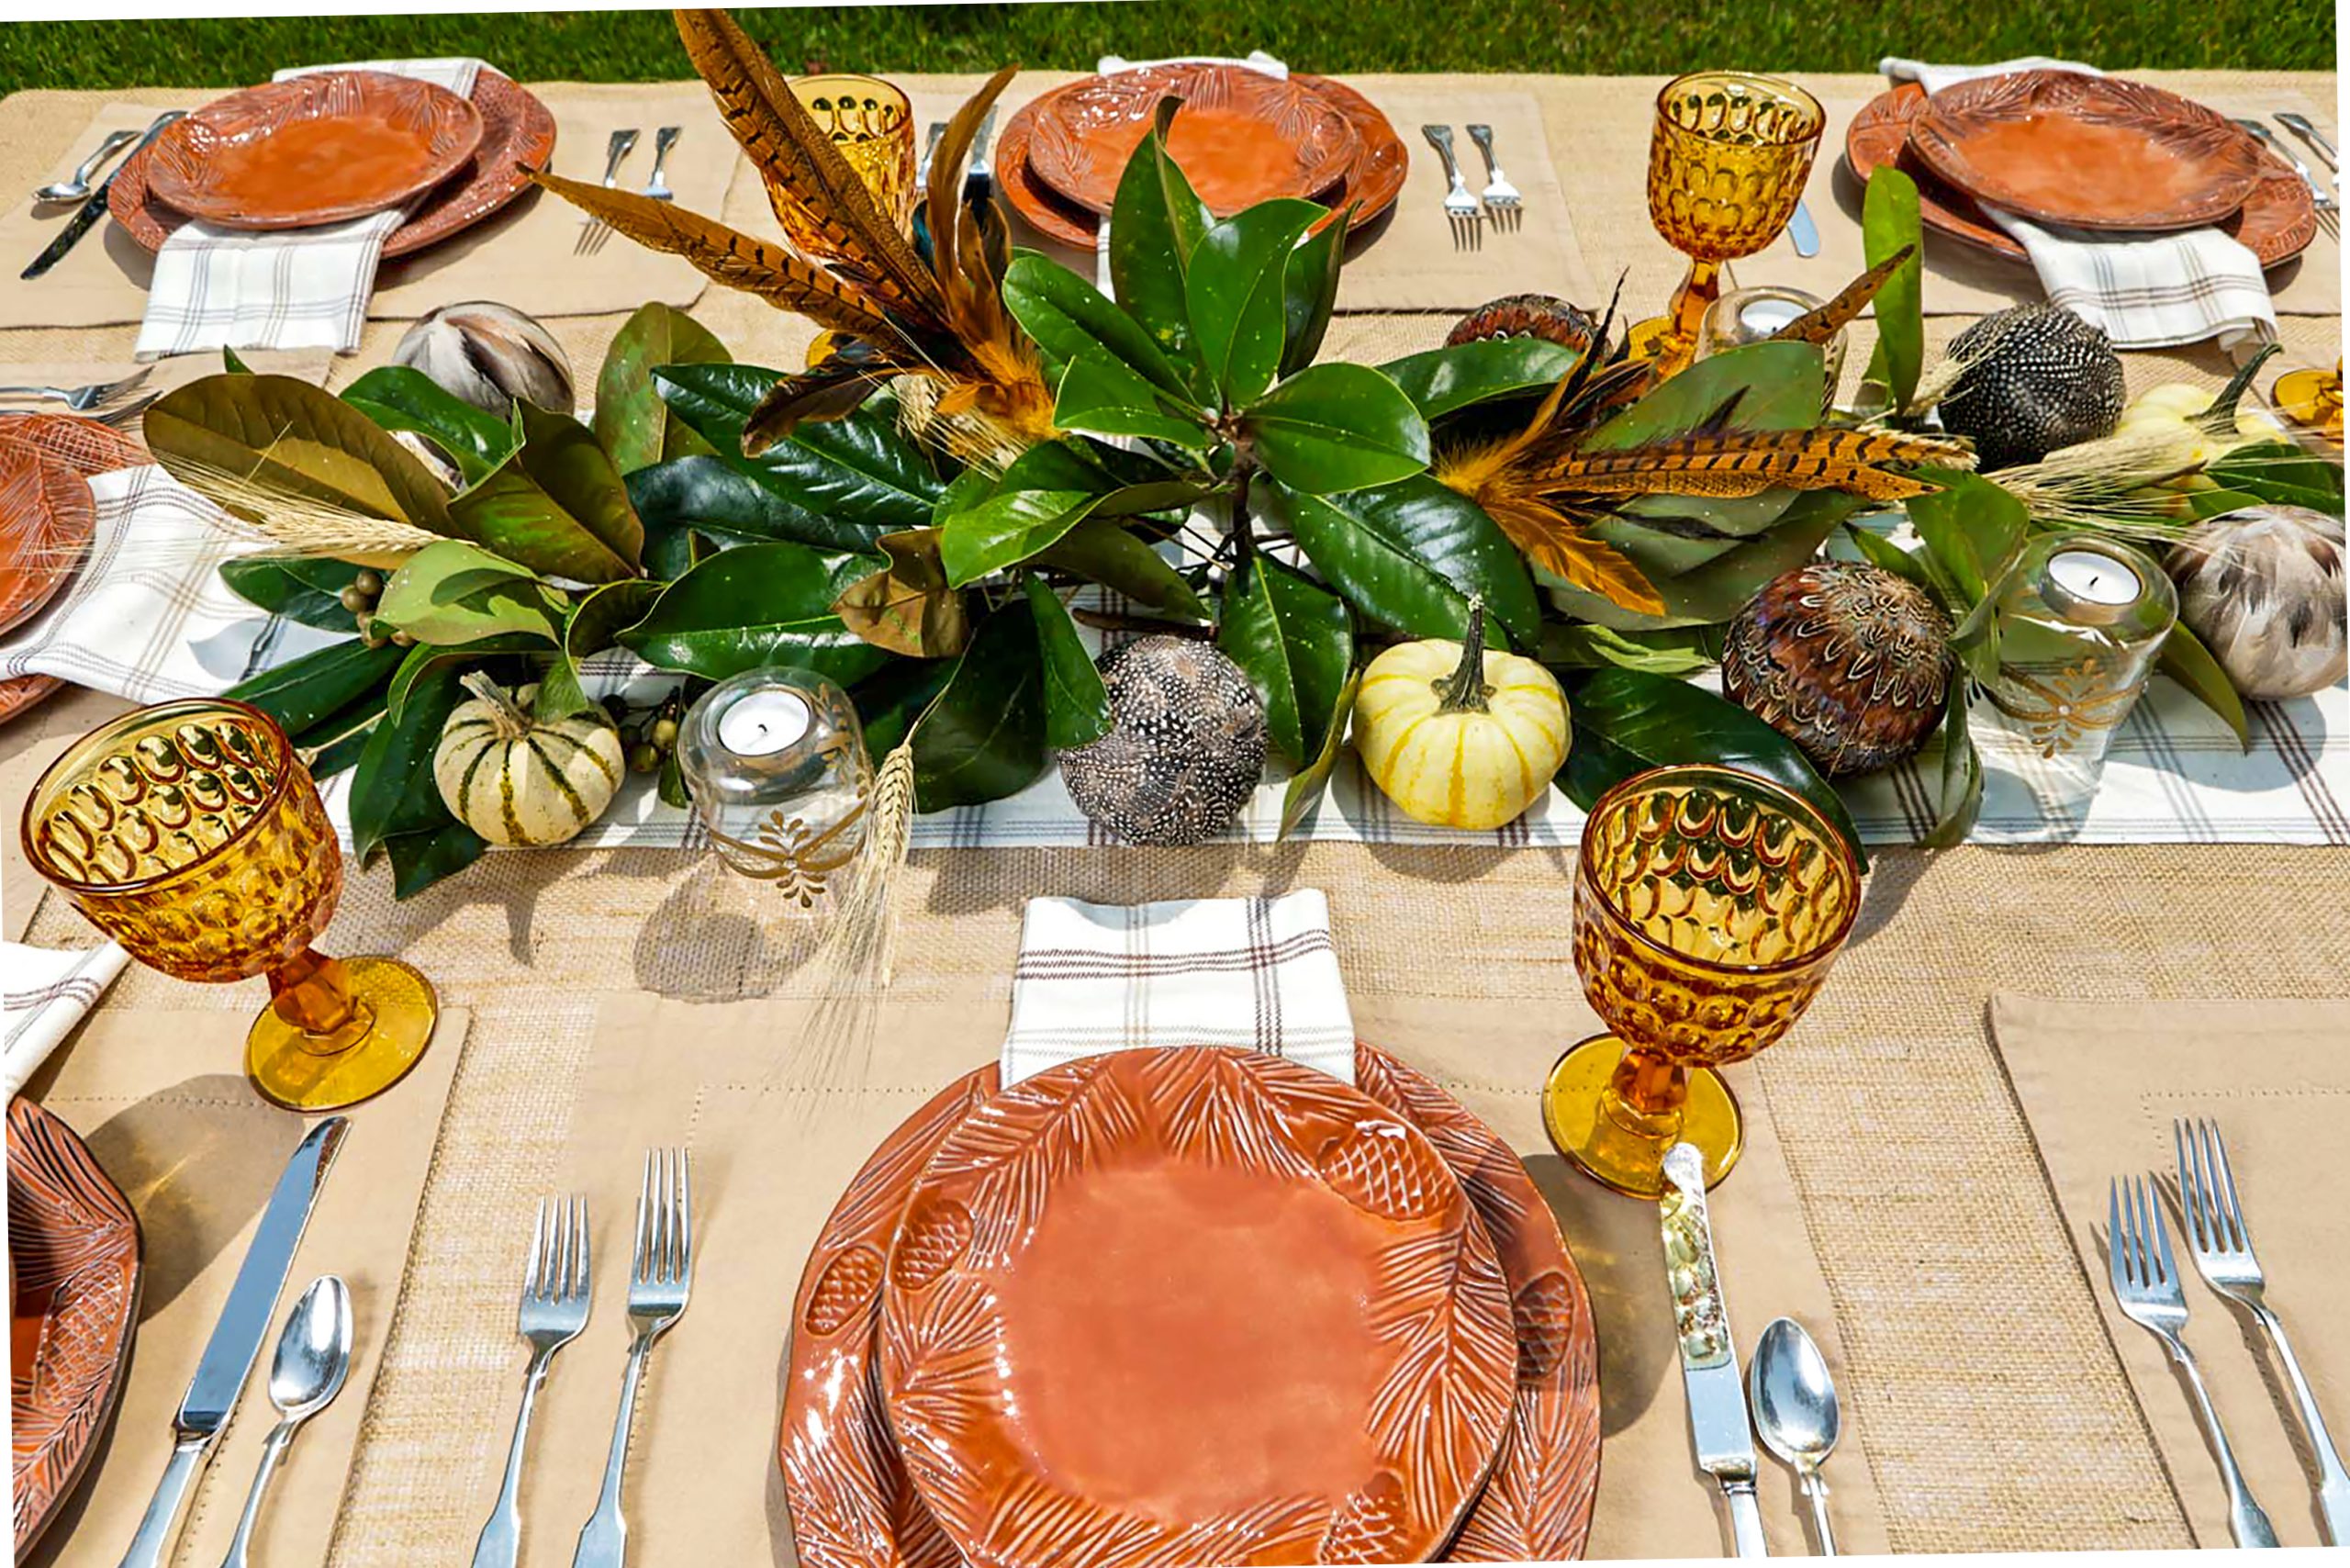  Transform the table above by using magnolia leaves, feathers, and just a few pumpkins for a completely different aesthetic!